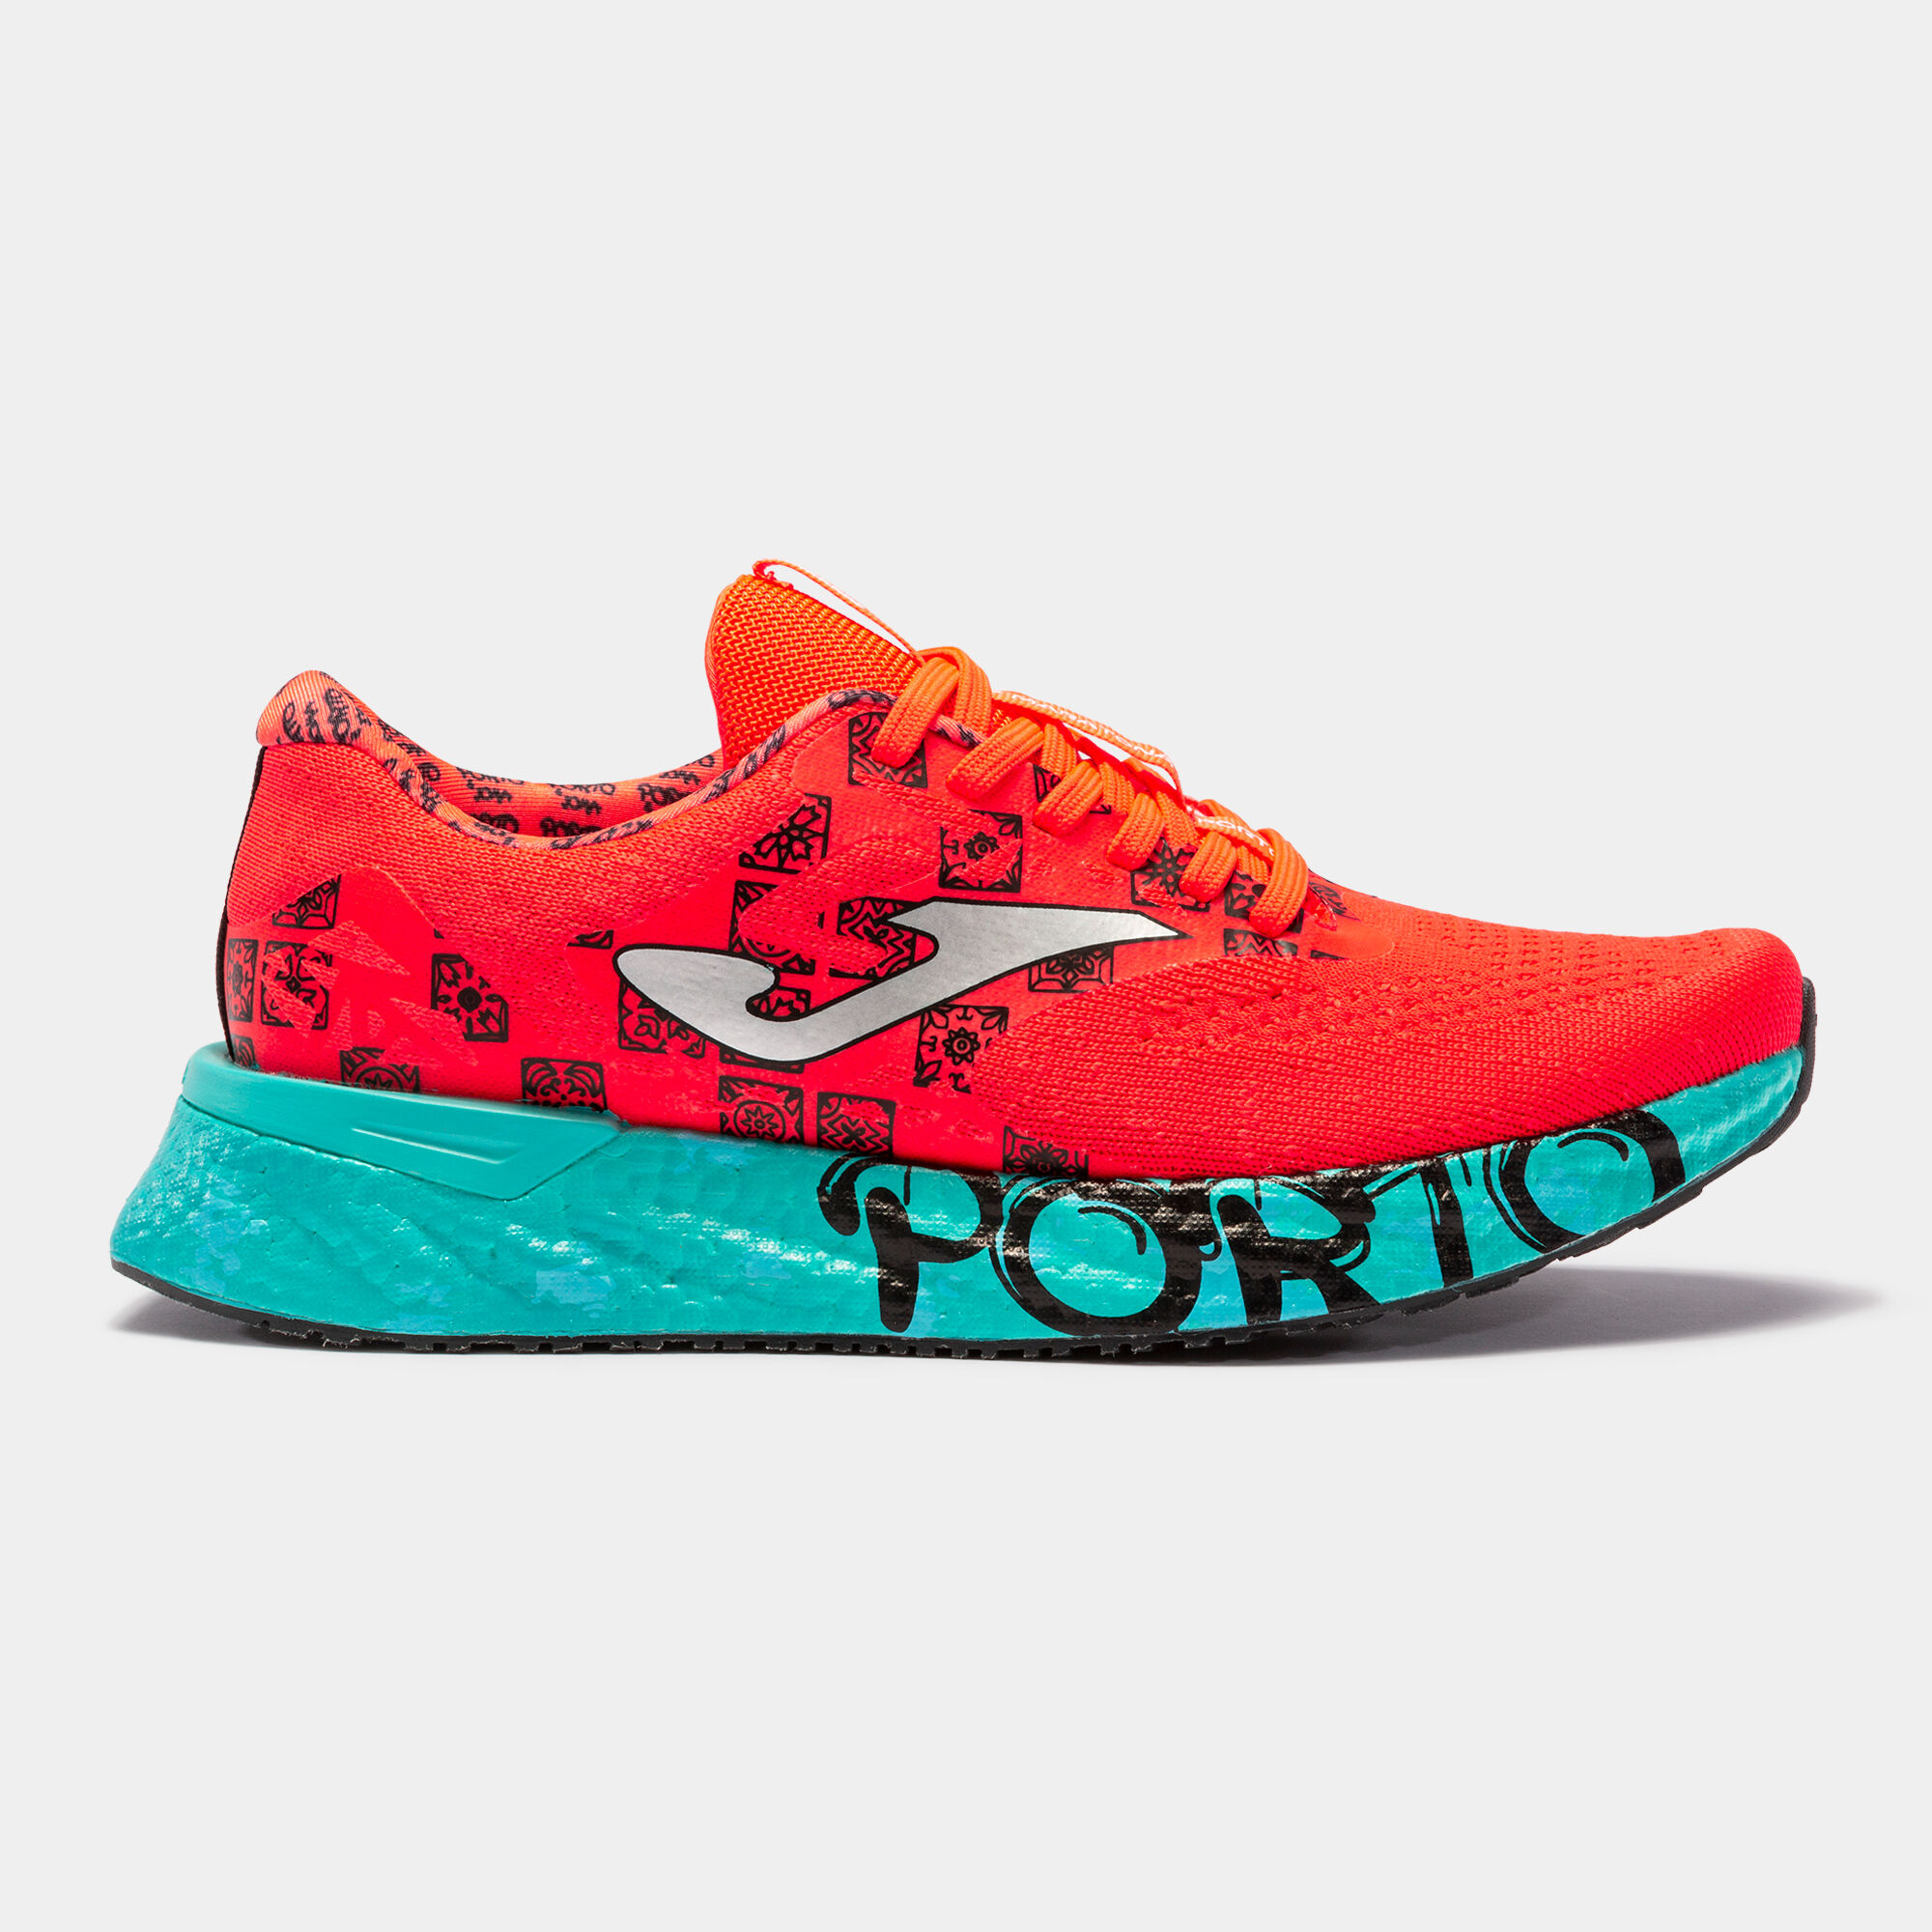 RUNNING SHOES STORM VIPER OPORTO MARATHON MAN CORAL TURQUOISE